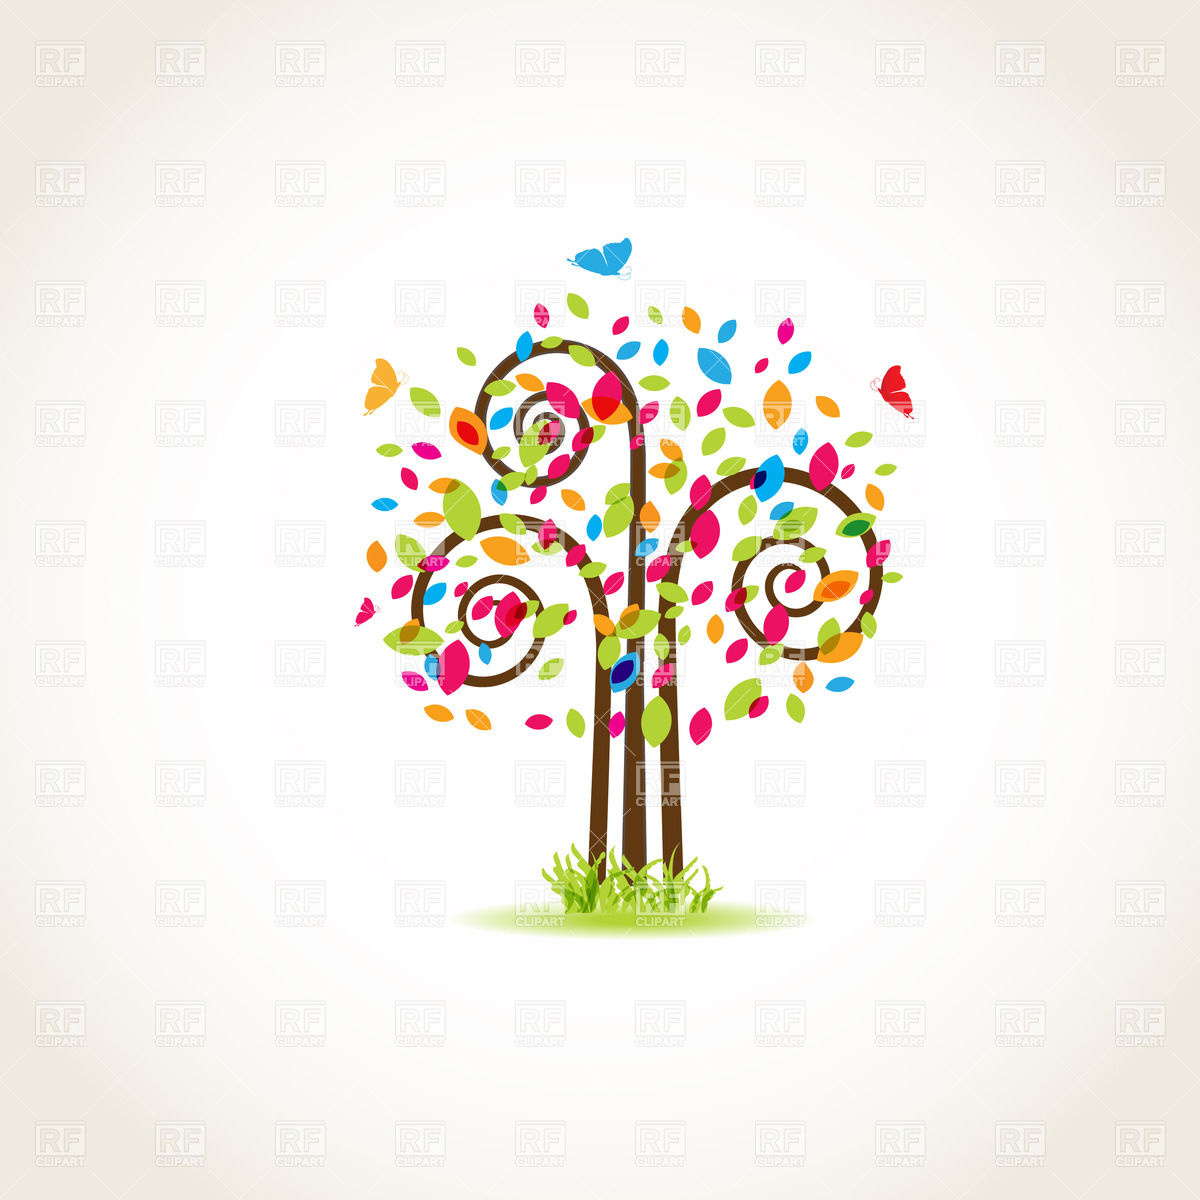 Stylized Beautiful Spring Tree Covered With Colorful Leaves 23218